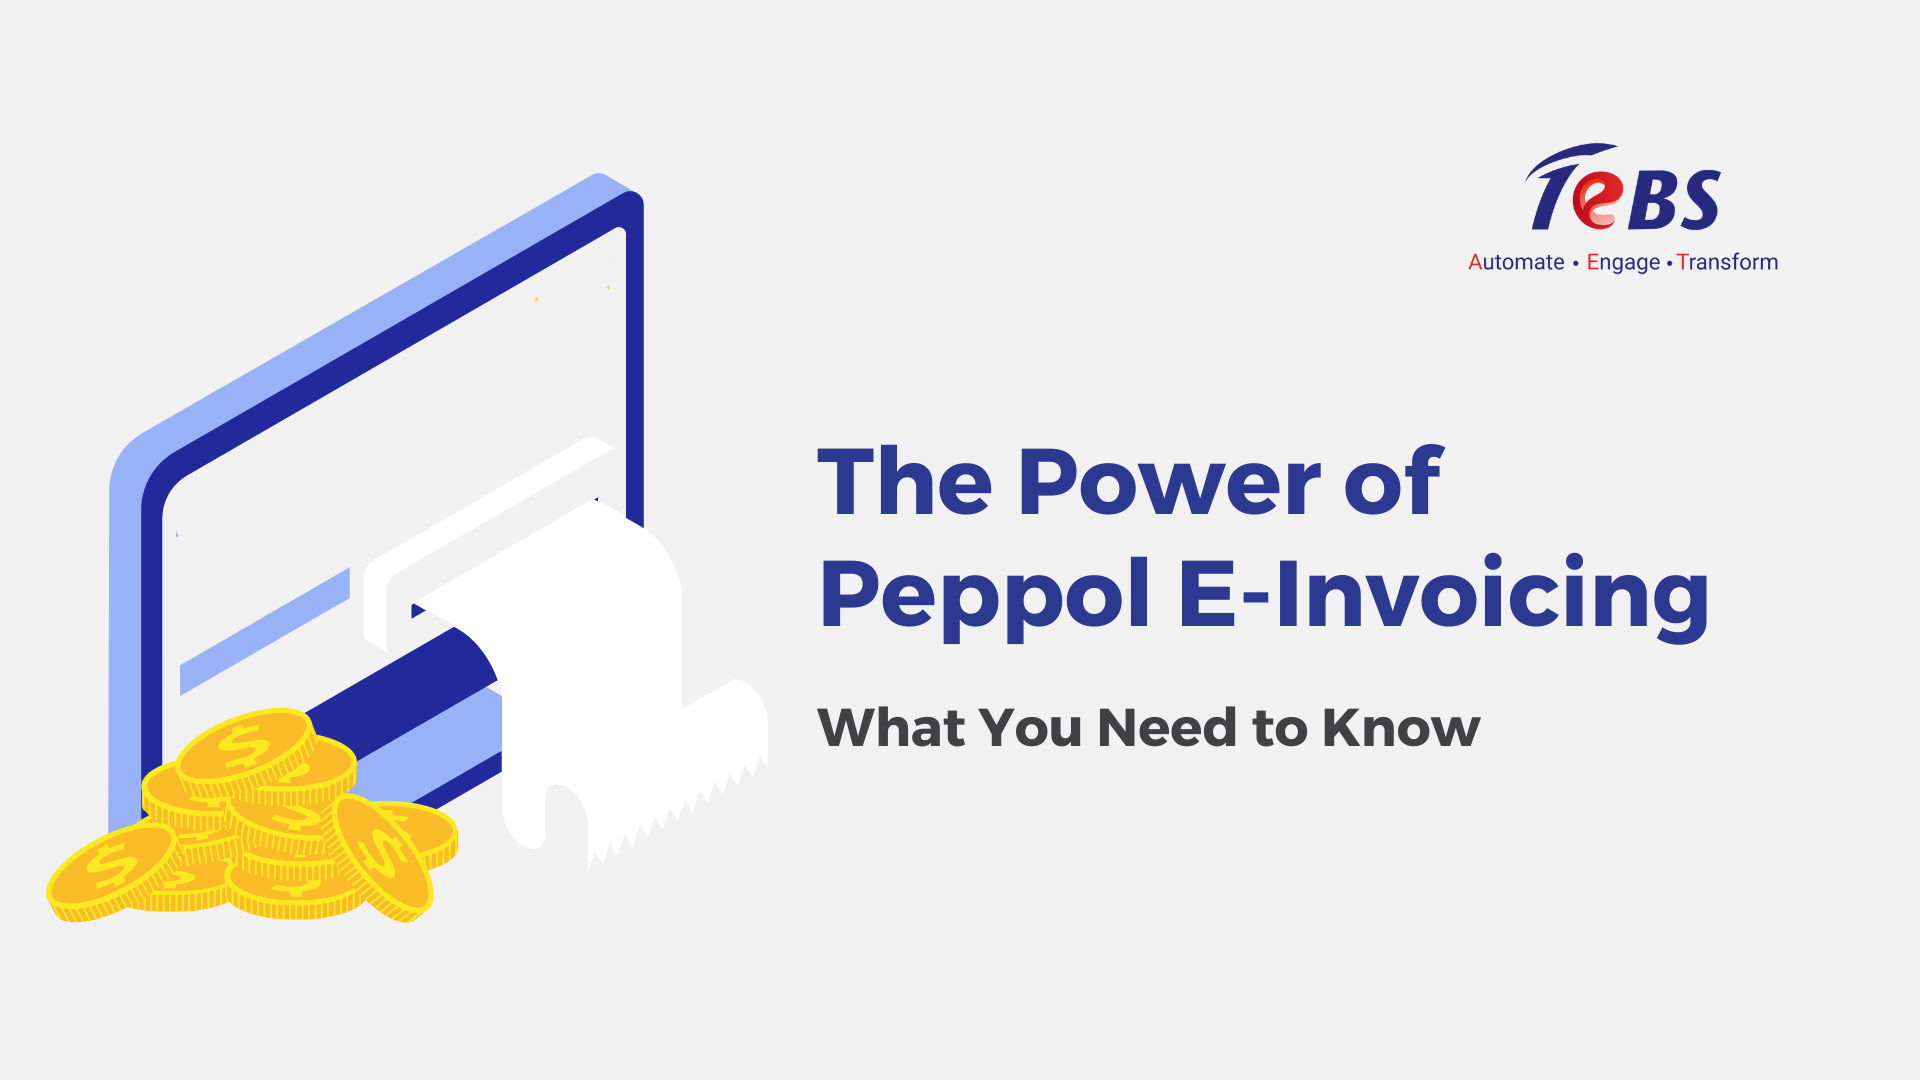 The Power of Peppol E-Invoicing: What You Need to Know